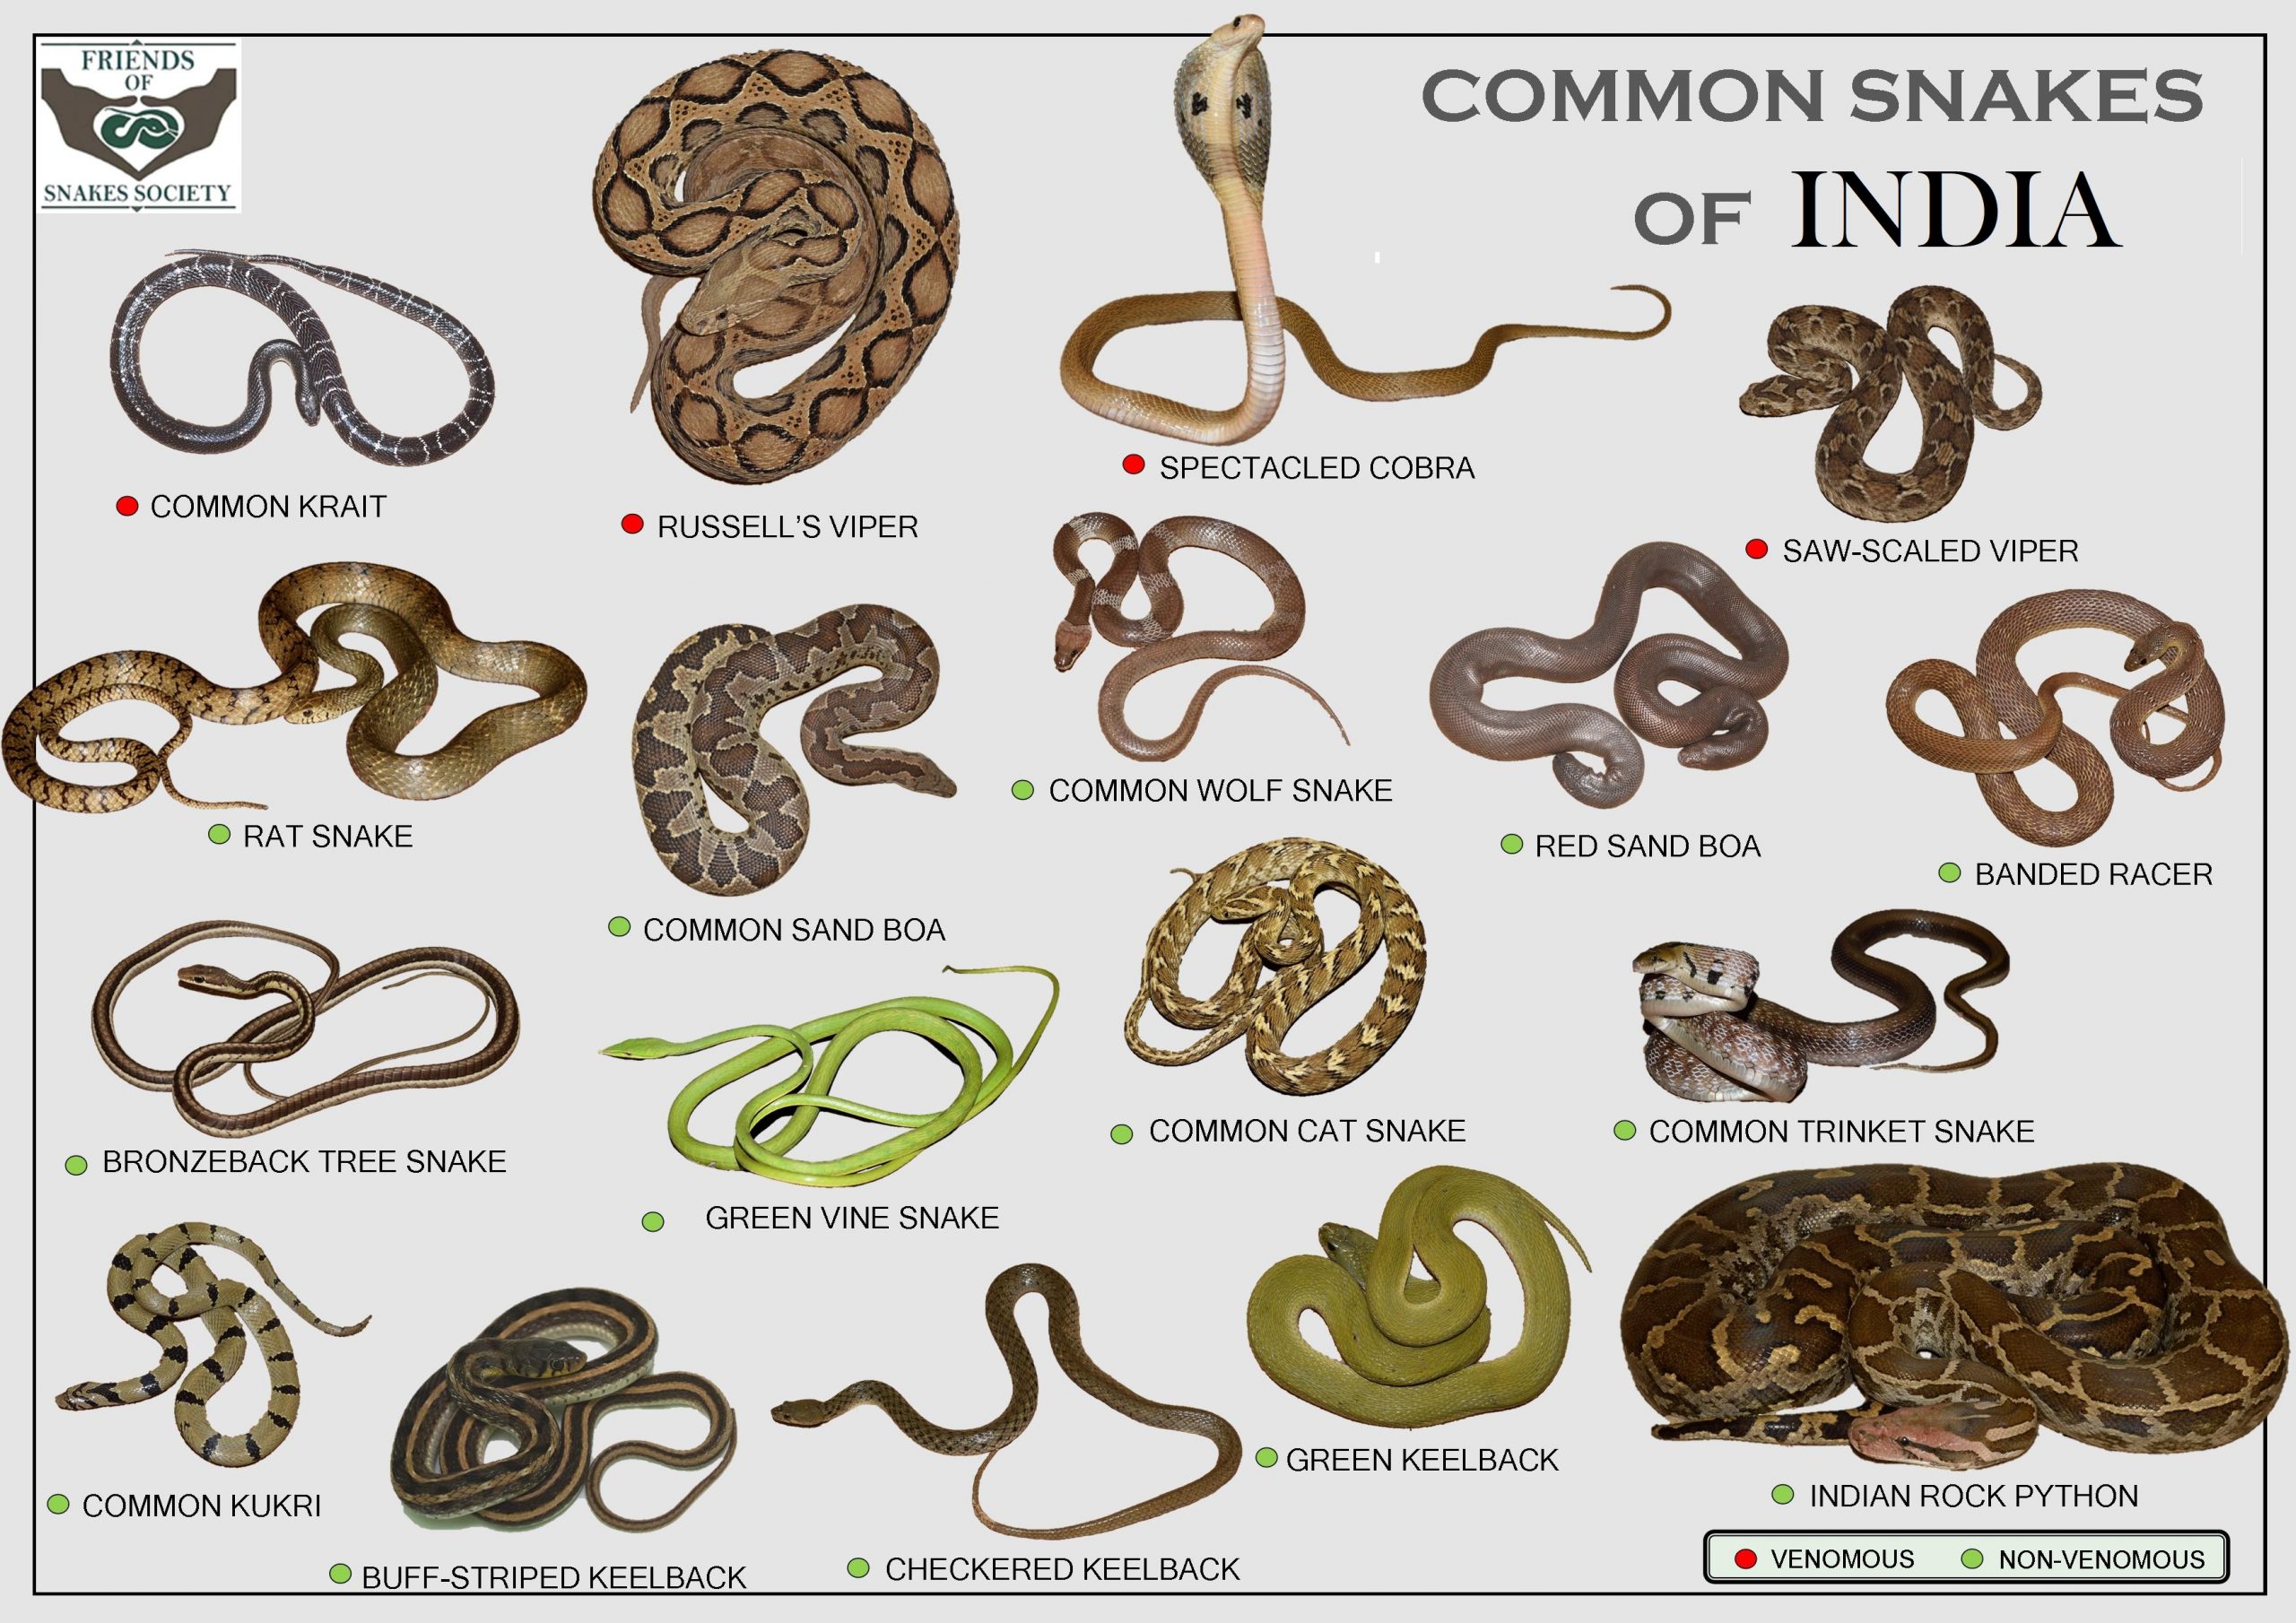 Common Snakes Of India Poster Scaled 